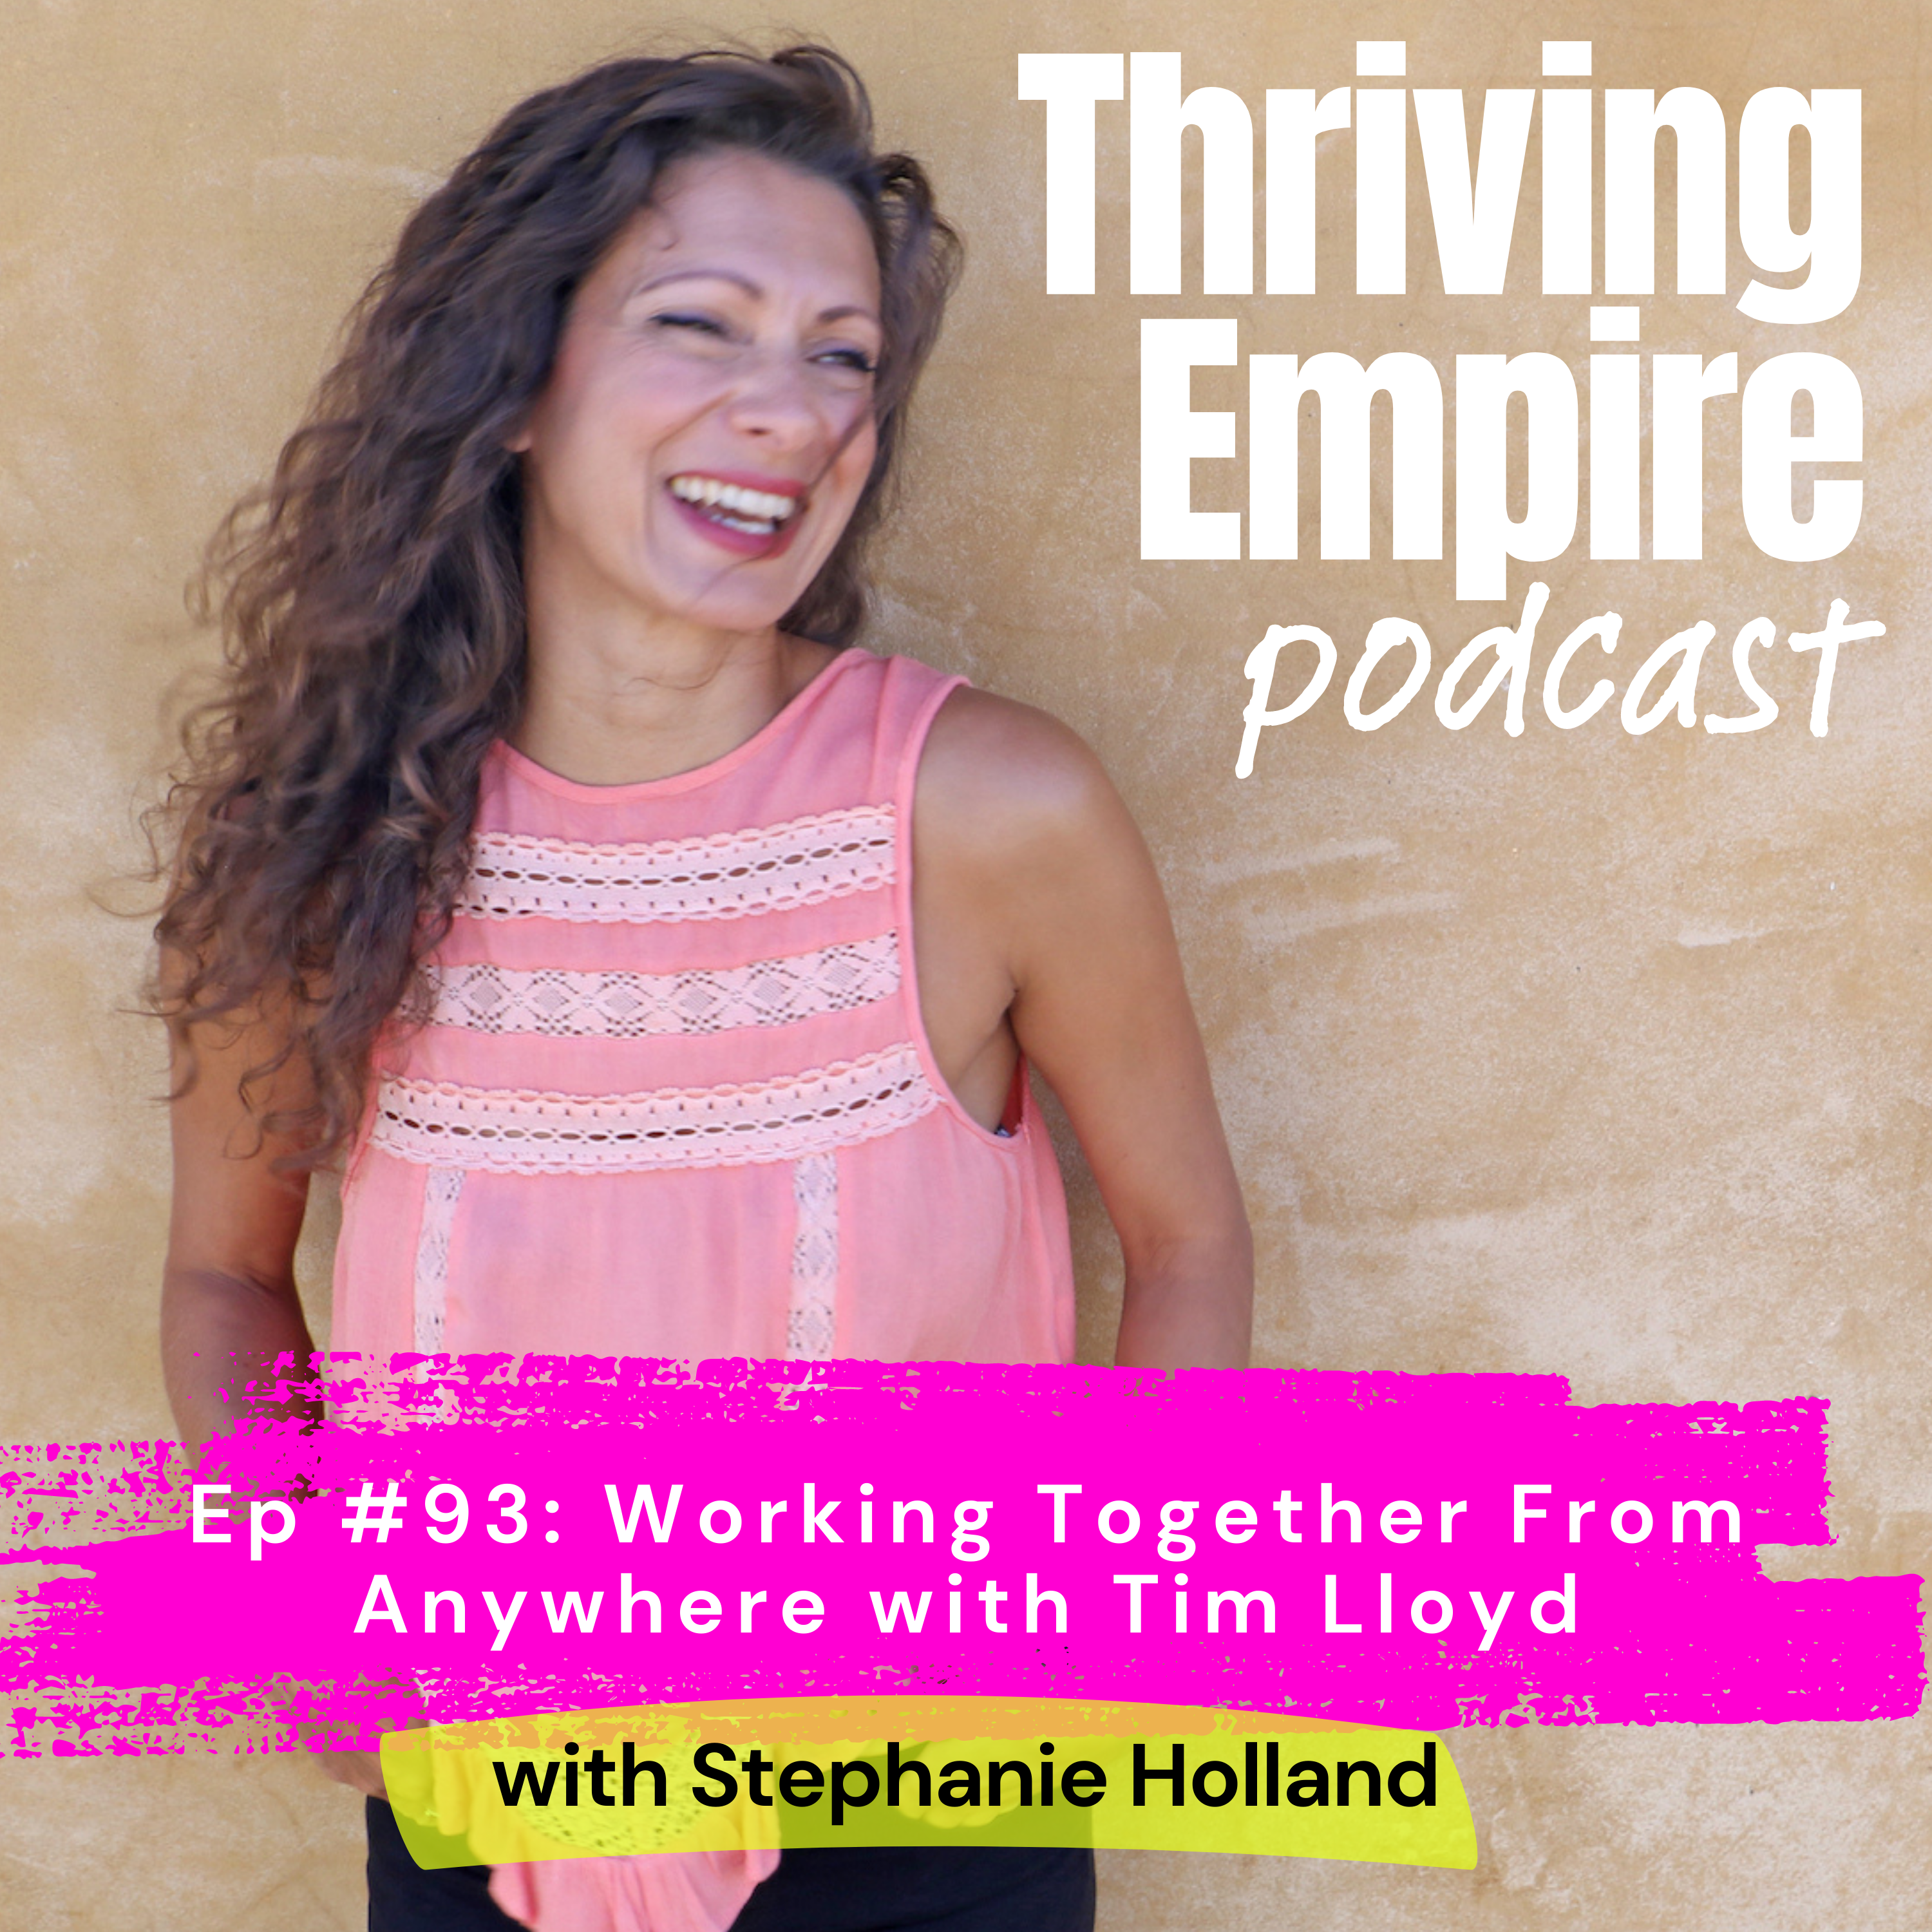 Ep #93: Working Together From Anywhere with Tim Lloyd